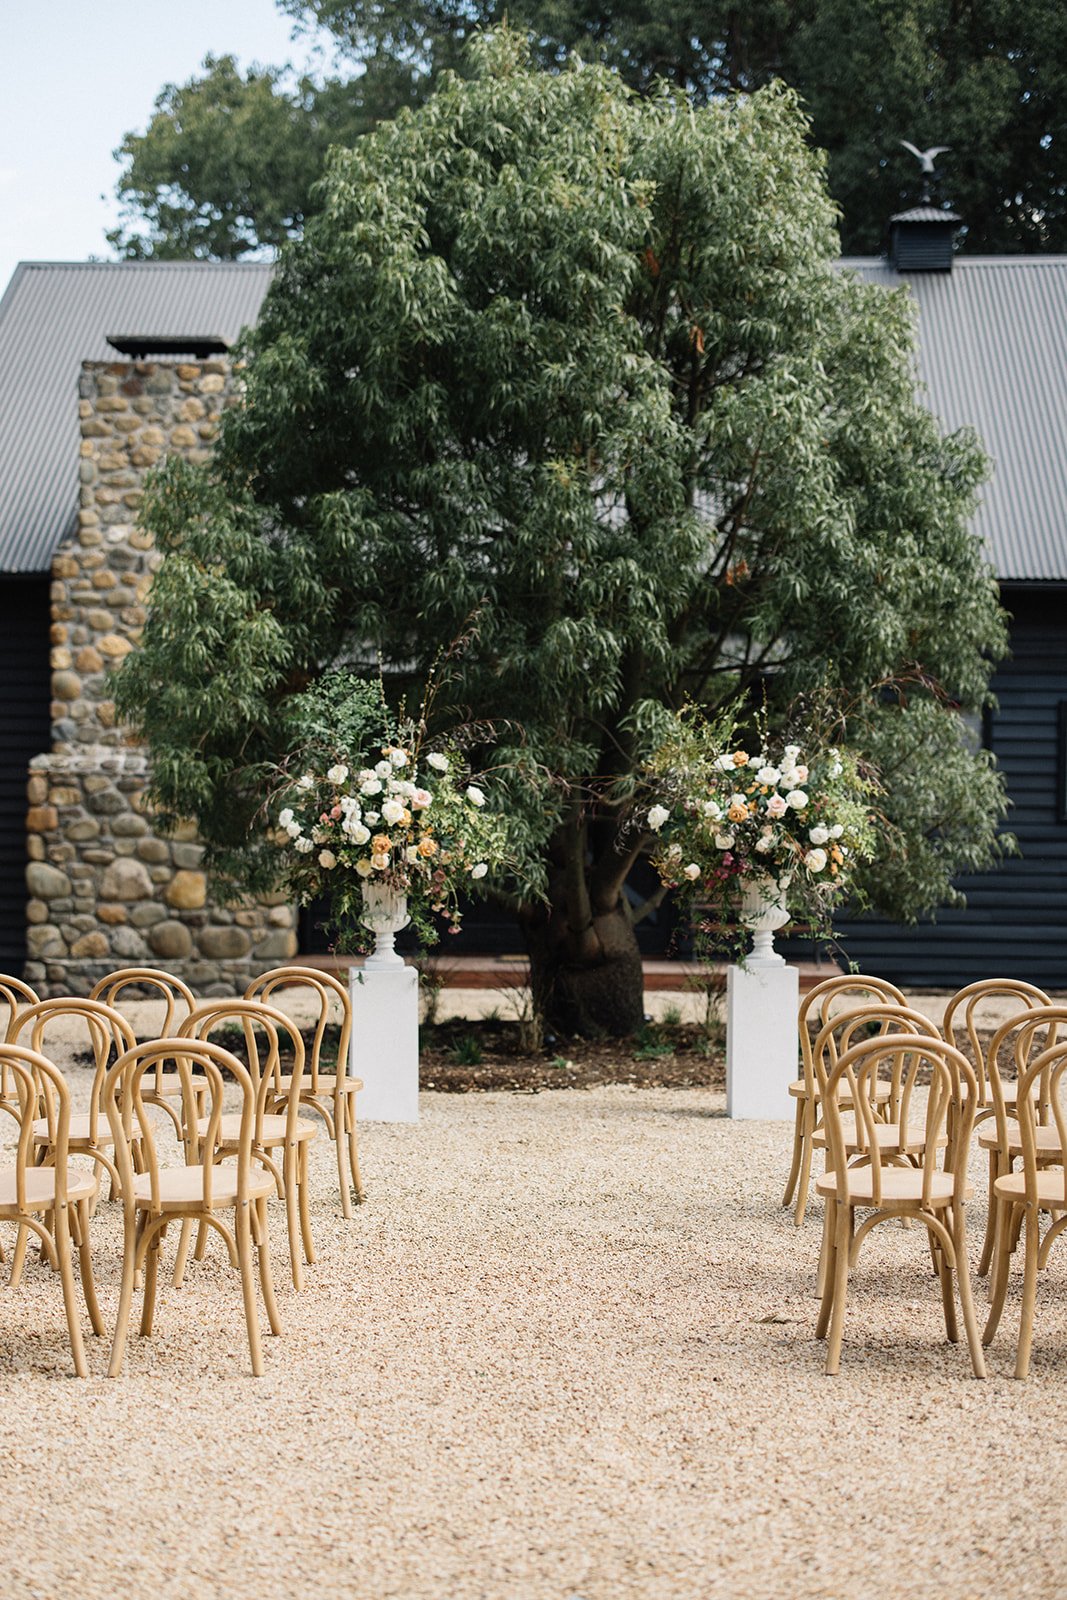 Kwila Lodge ceremony venue set up with bentwood chairs, two floral plinths and a large fig tree